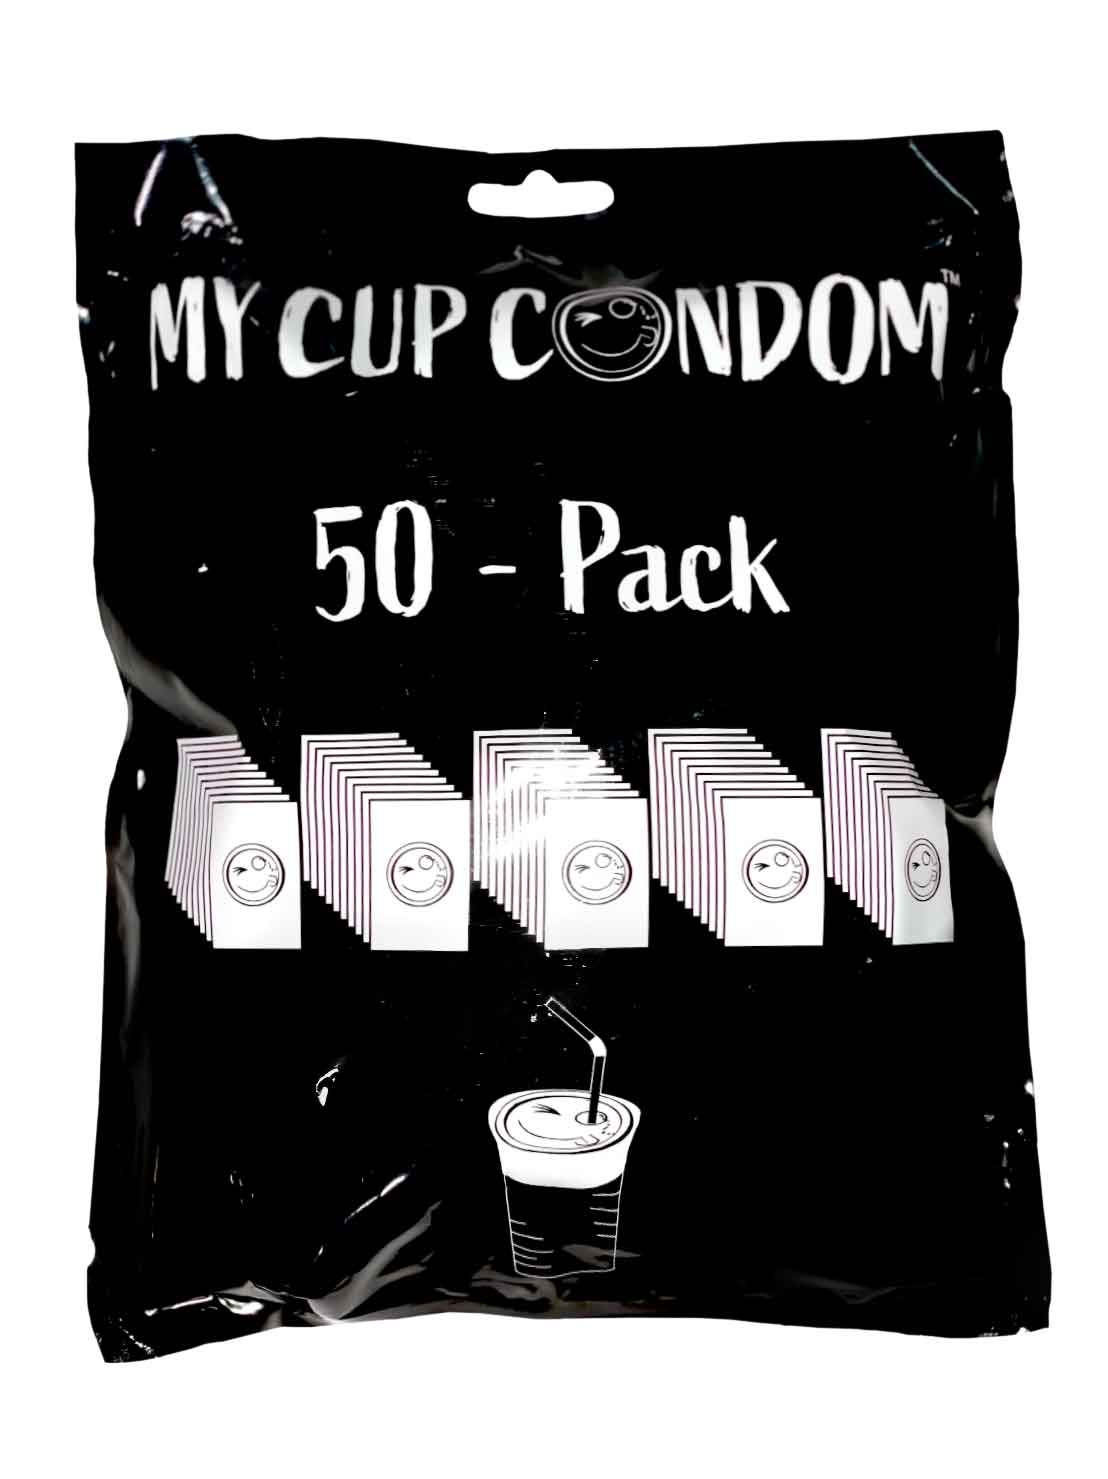 My Cup Condom - 50 Pack